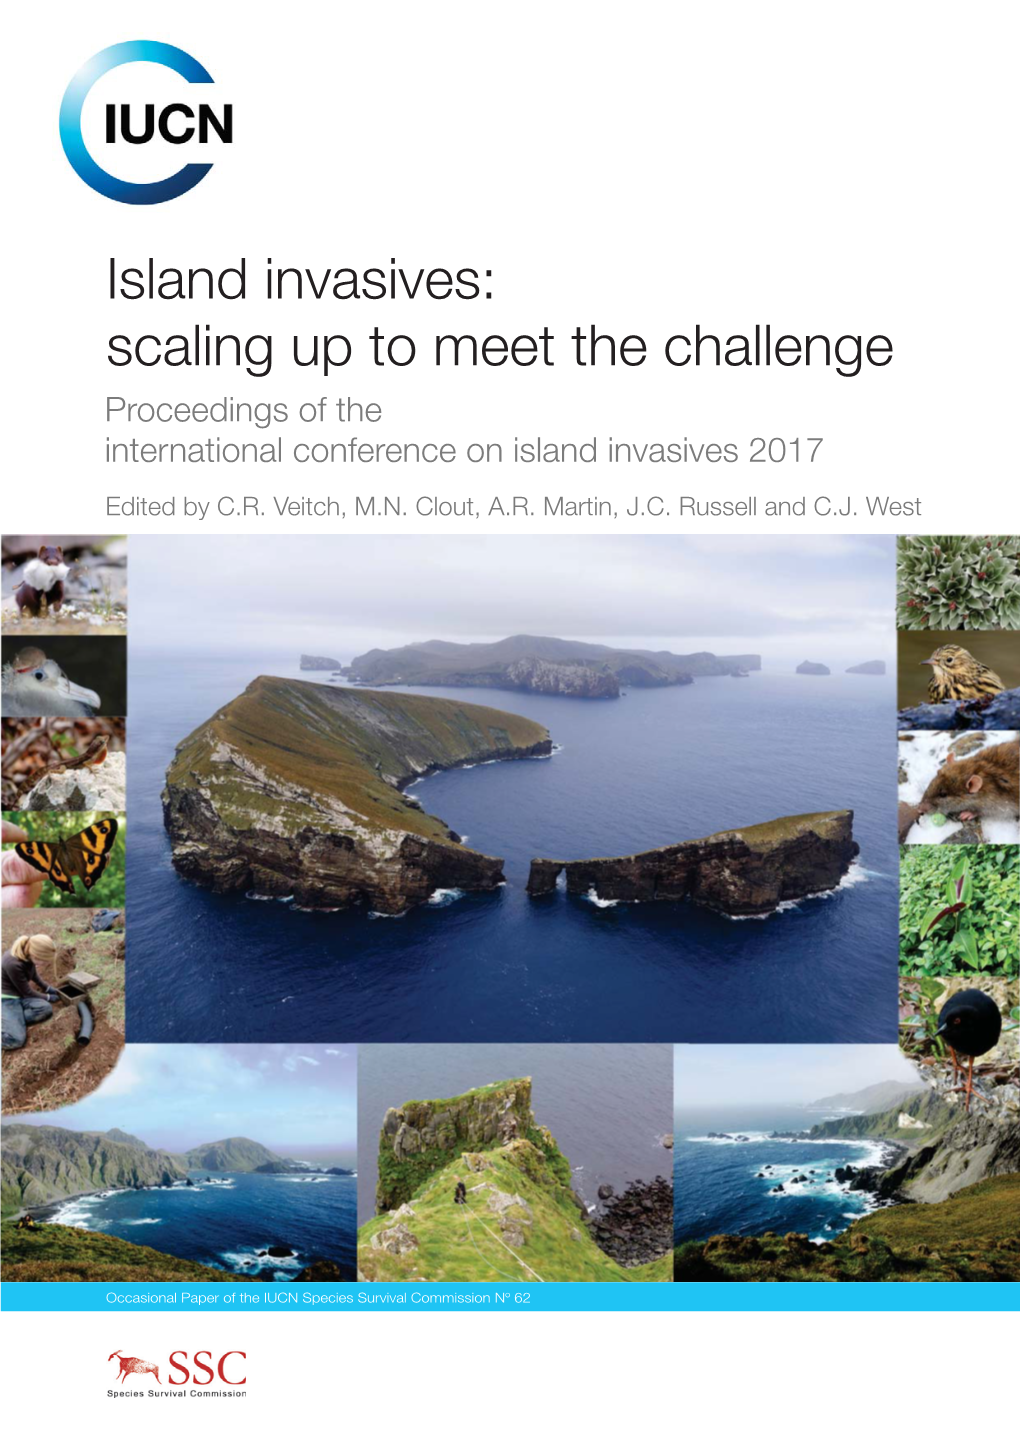 Island Invasives: Scaling up to Meet the Challenge Proceedings of the International Conference on Island Invasives 2017